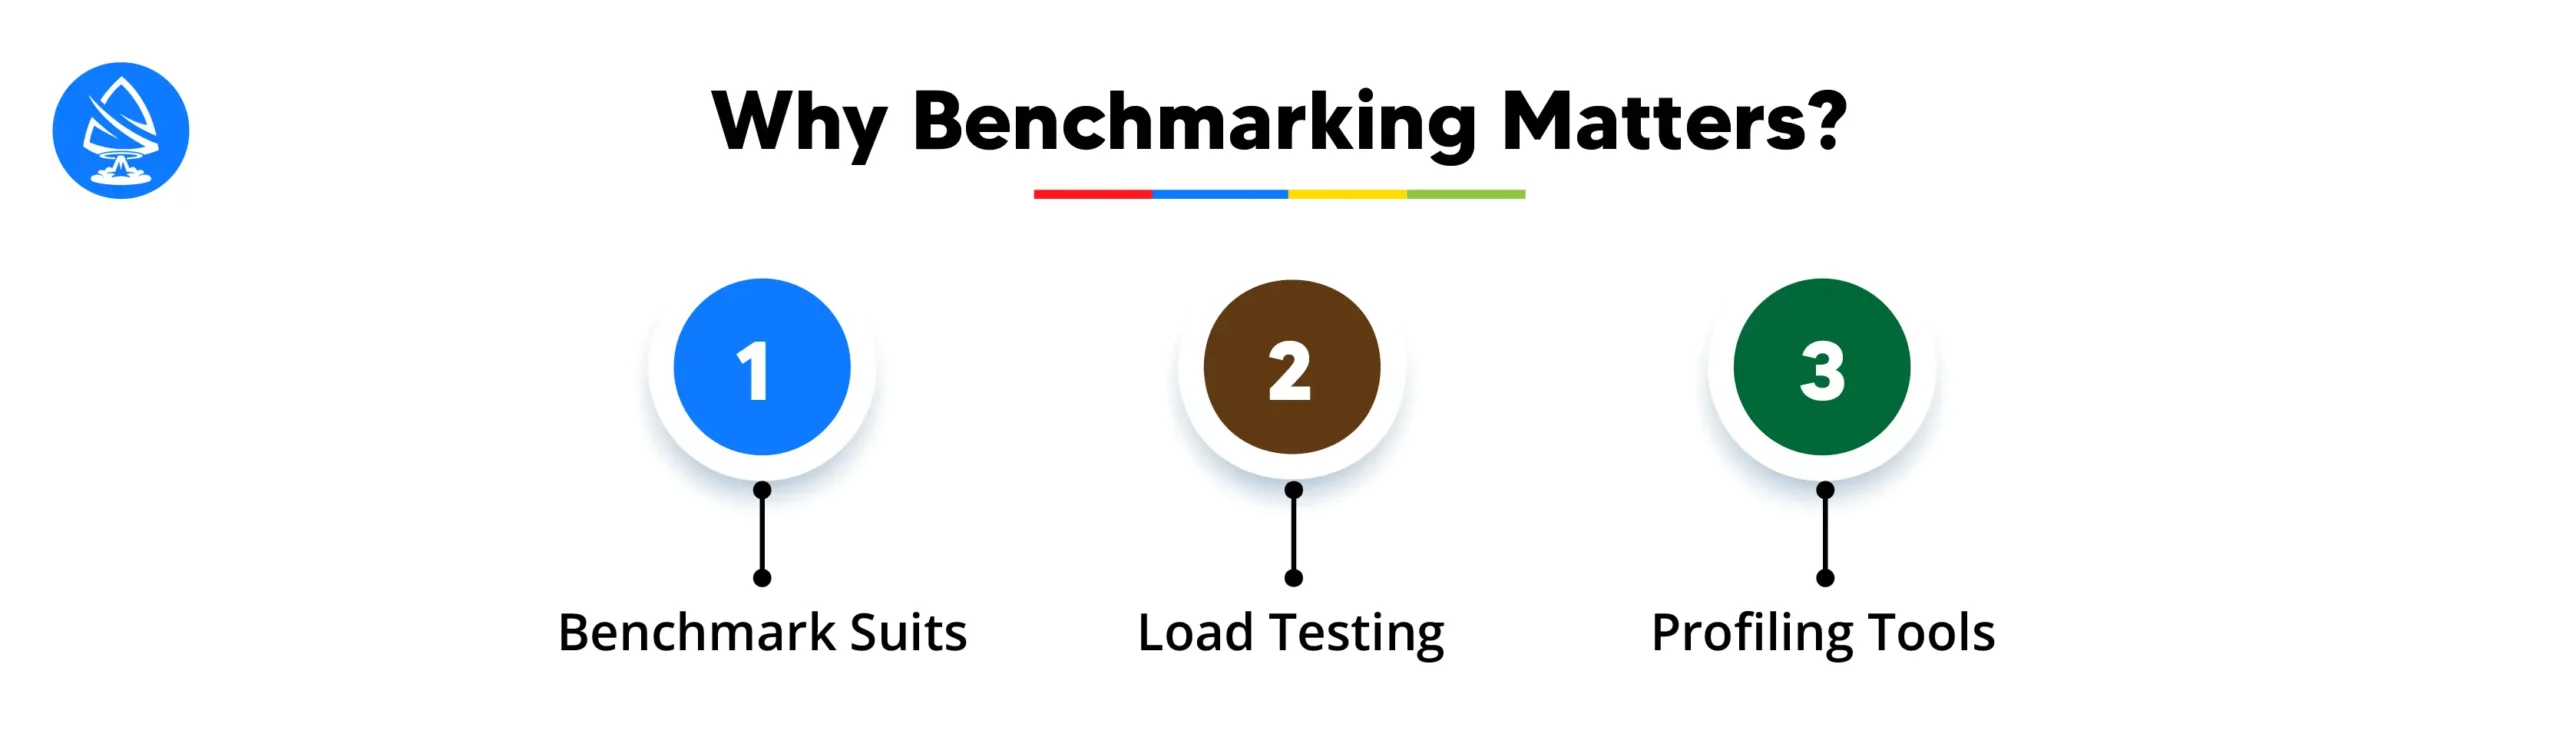 Why Benchmarking Matters: Understanding Benchmarks and Testing Methodologies 